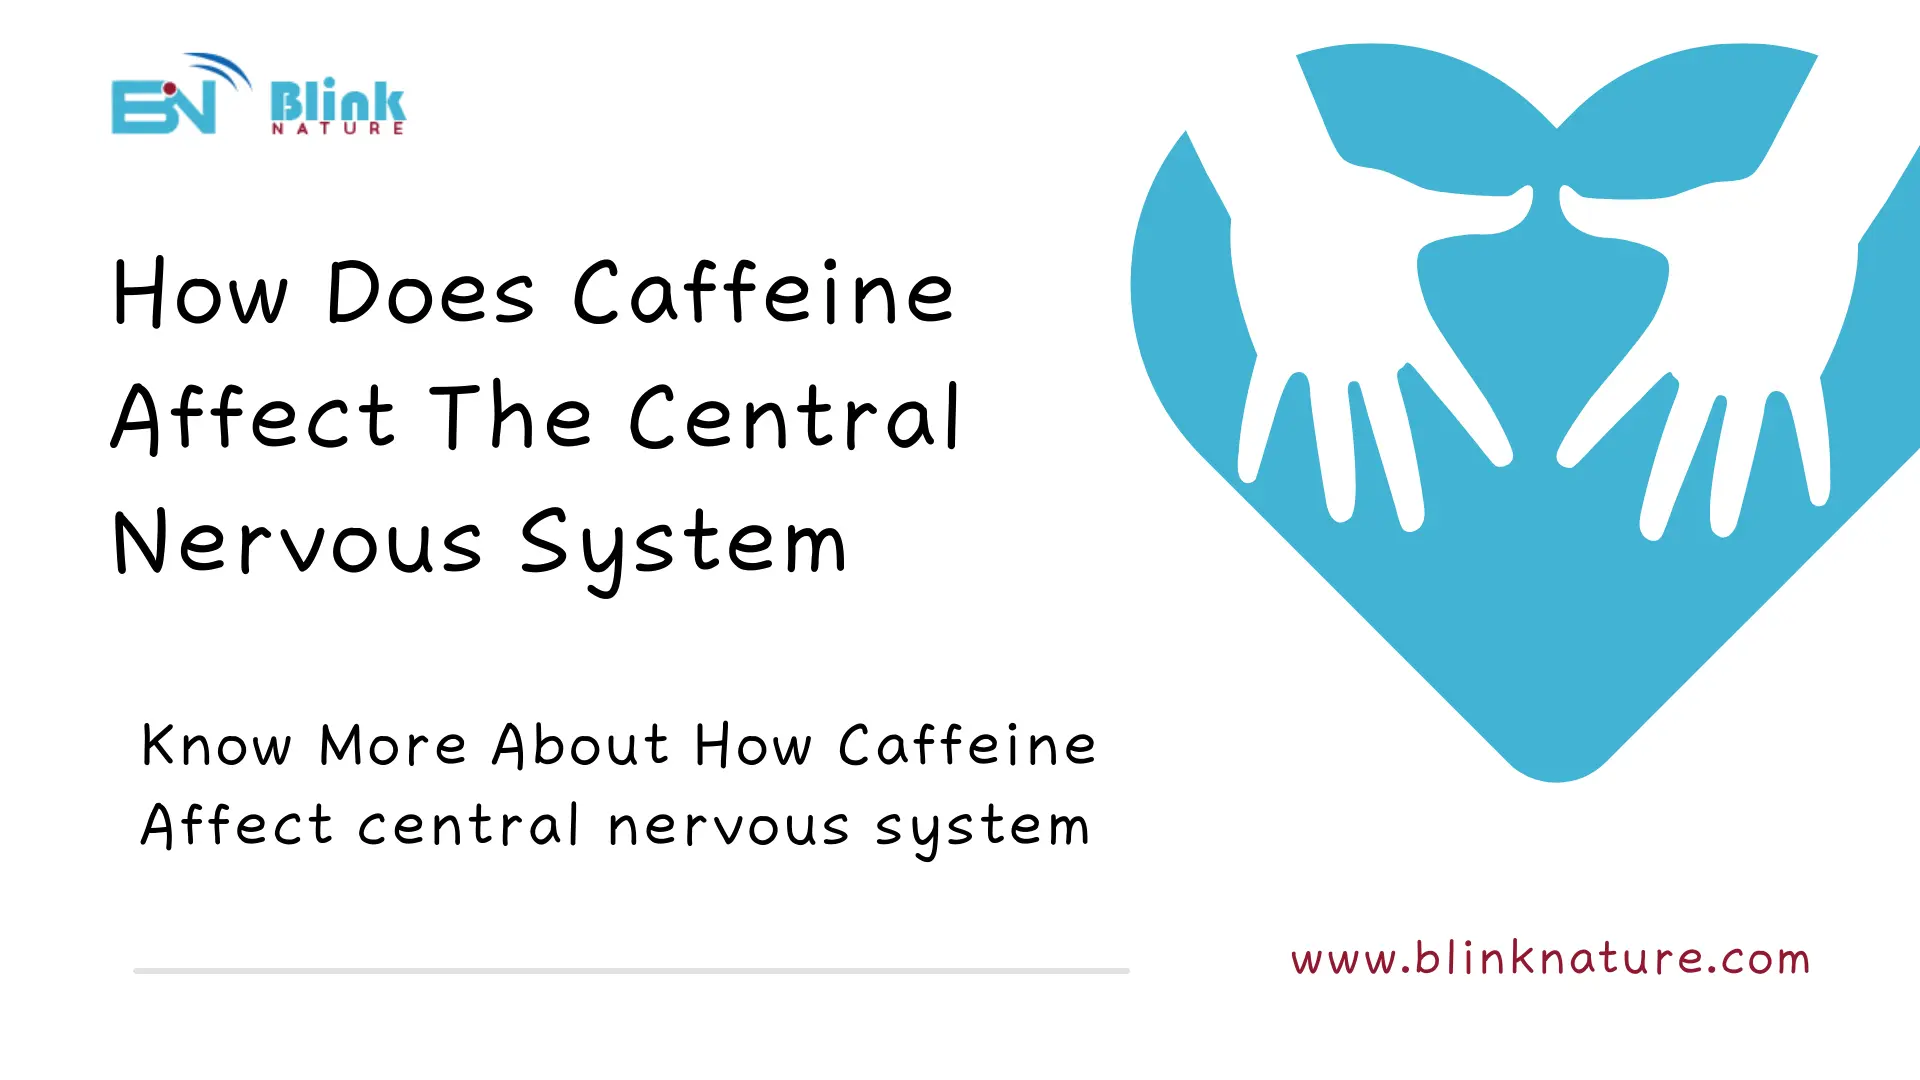 How does caffeine affect the central nervous system?